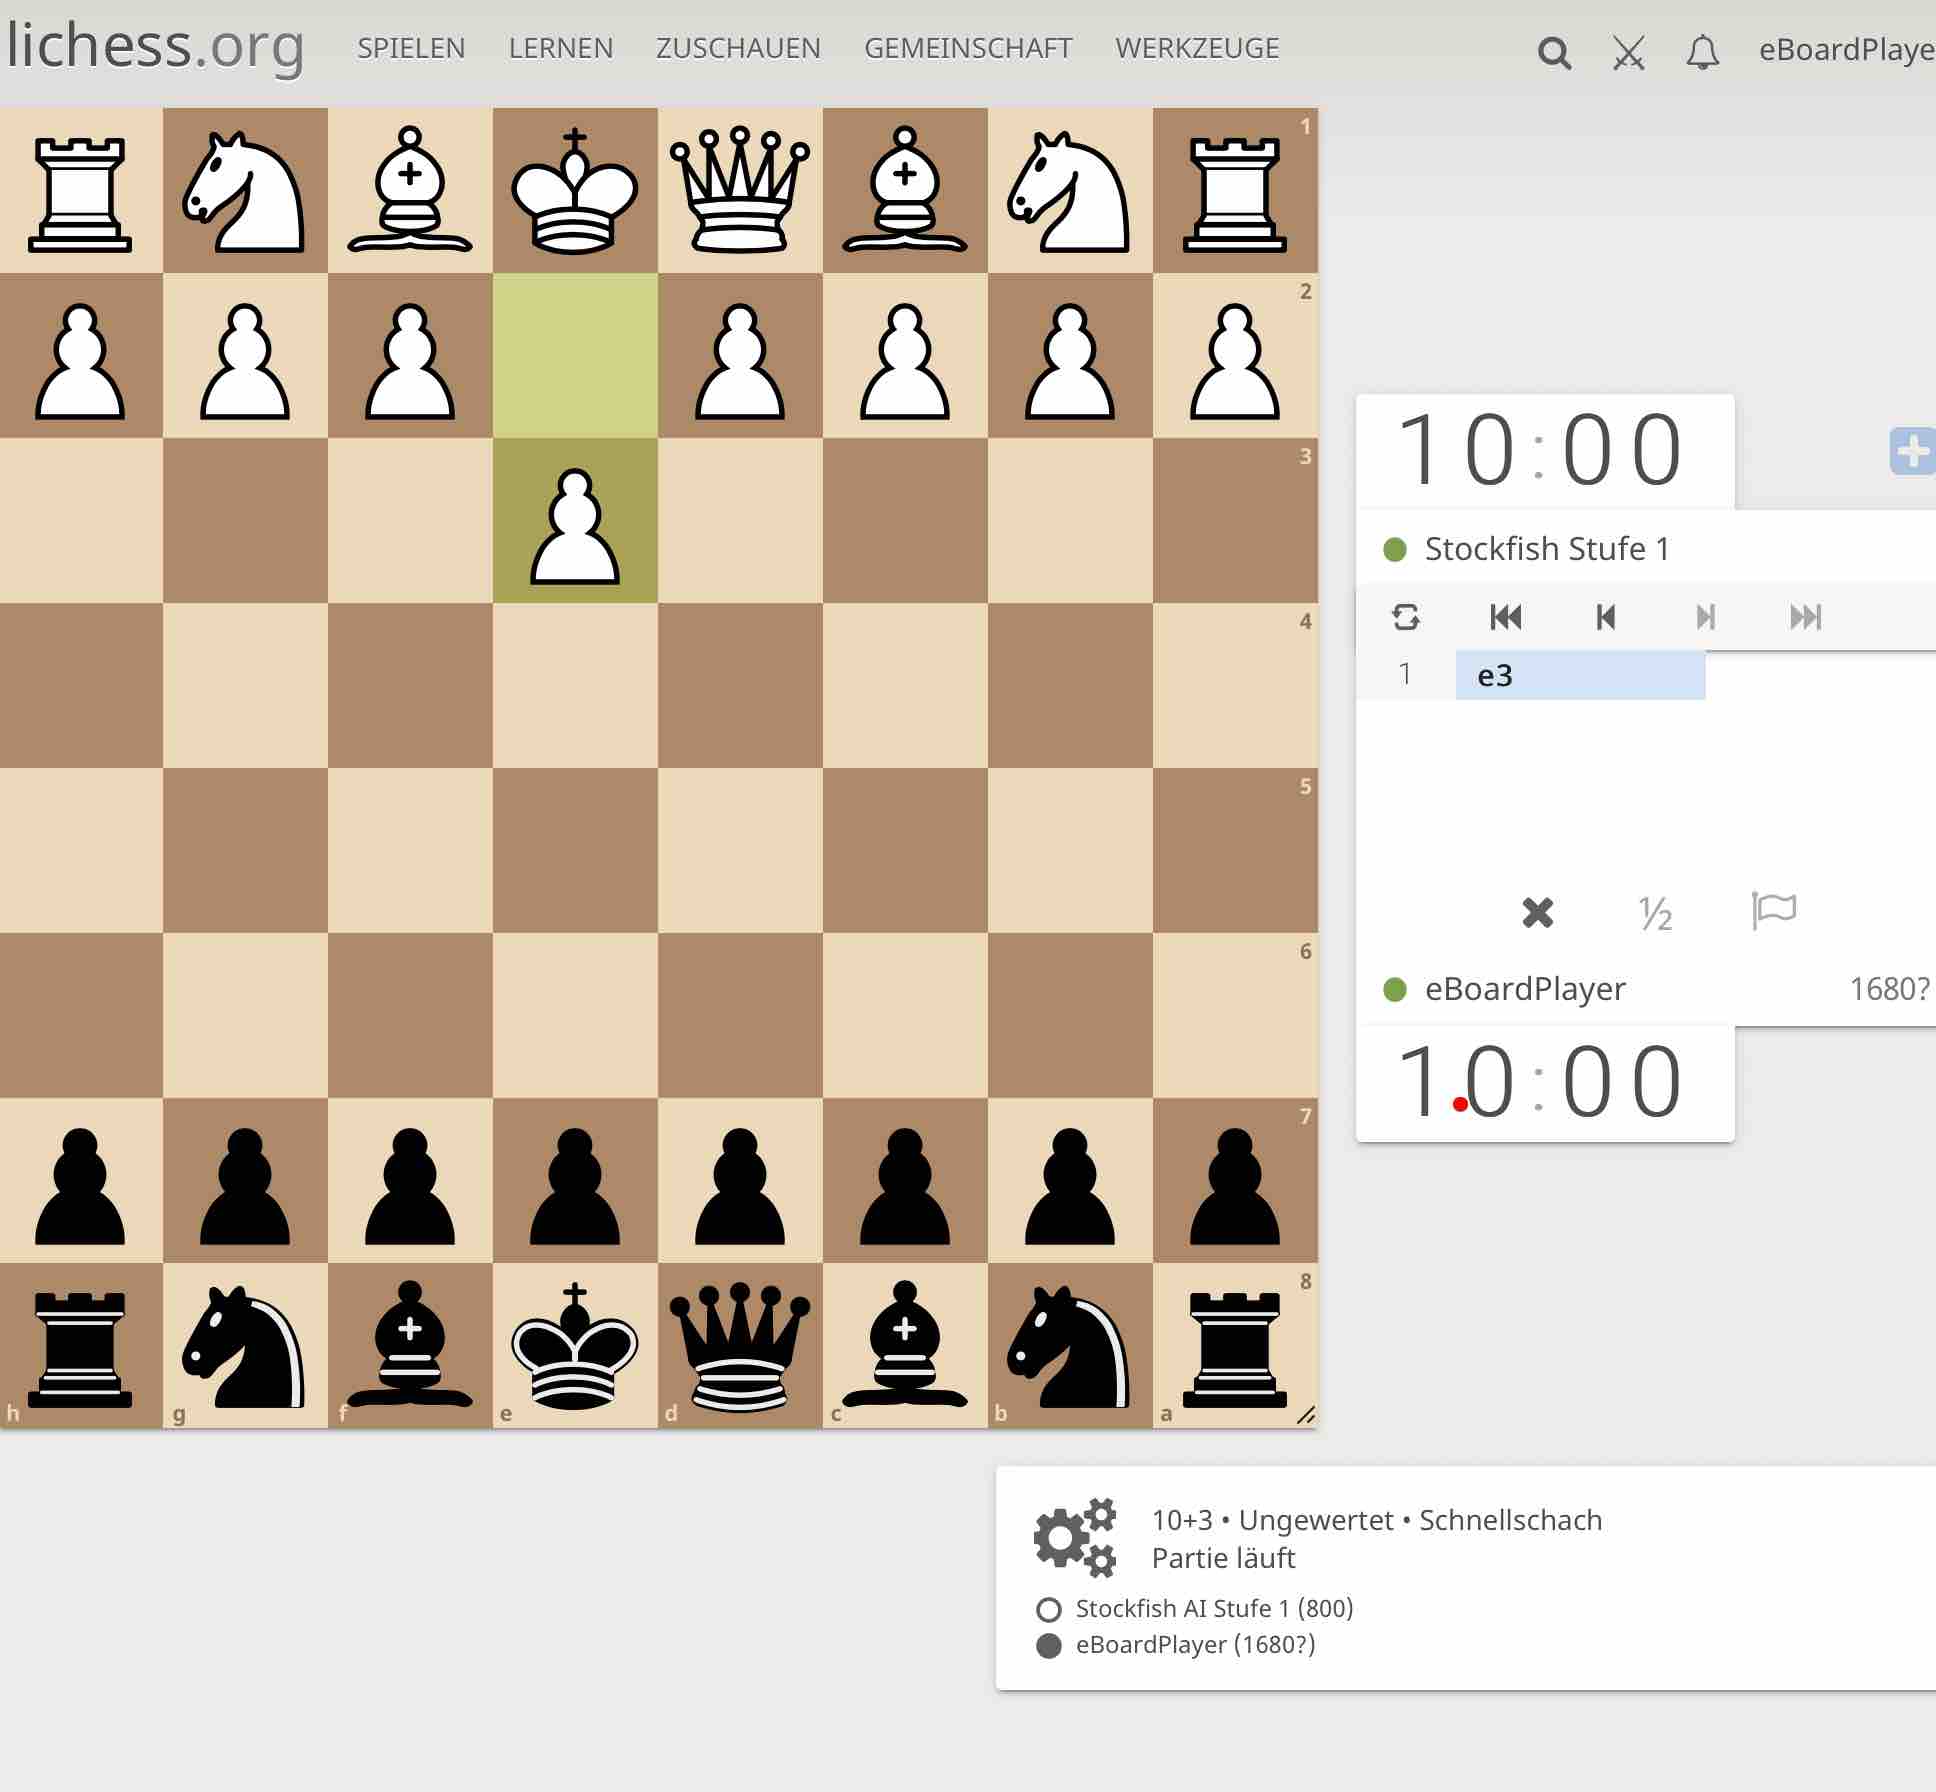 Does anyone know how to edit the clocks on lichess to look like